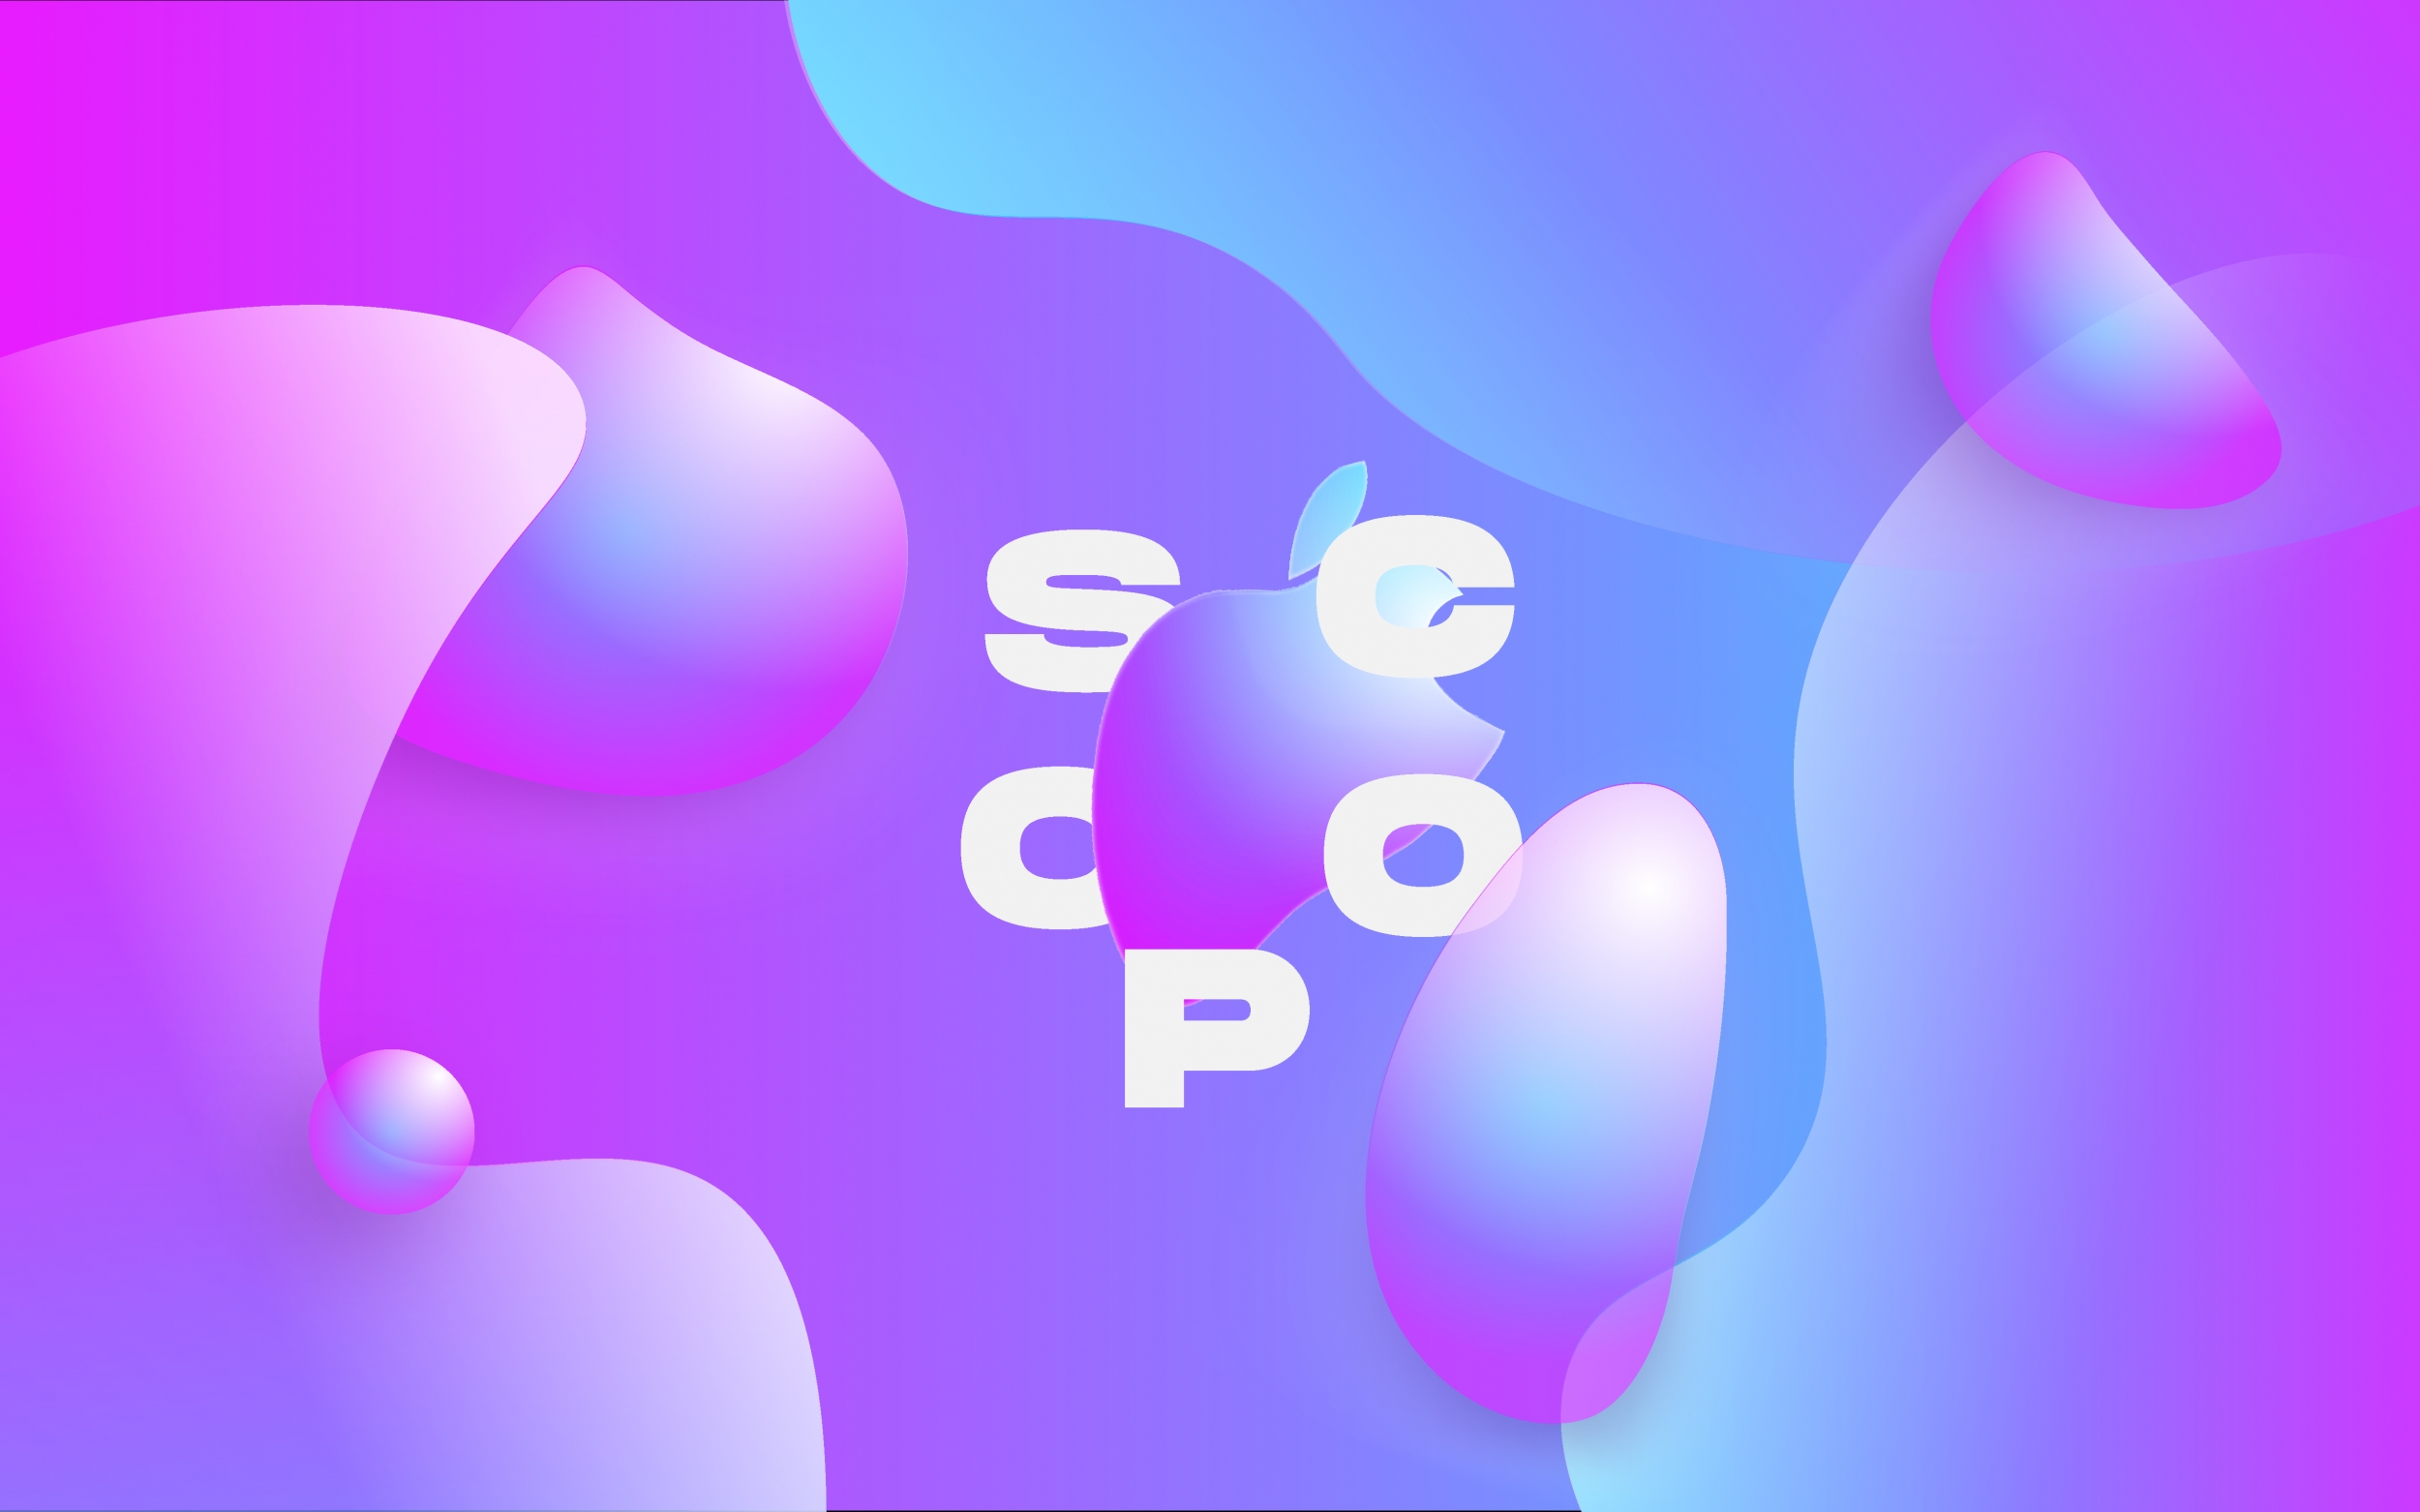 Apple Scoop Wallpaper In Purple-blue wallpaper for Apple iPhone, Mac, iPad and more